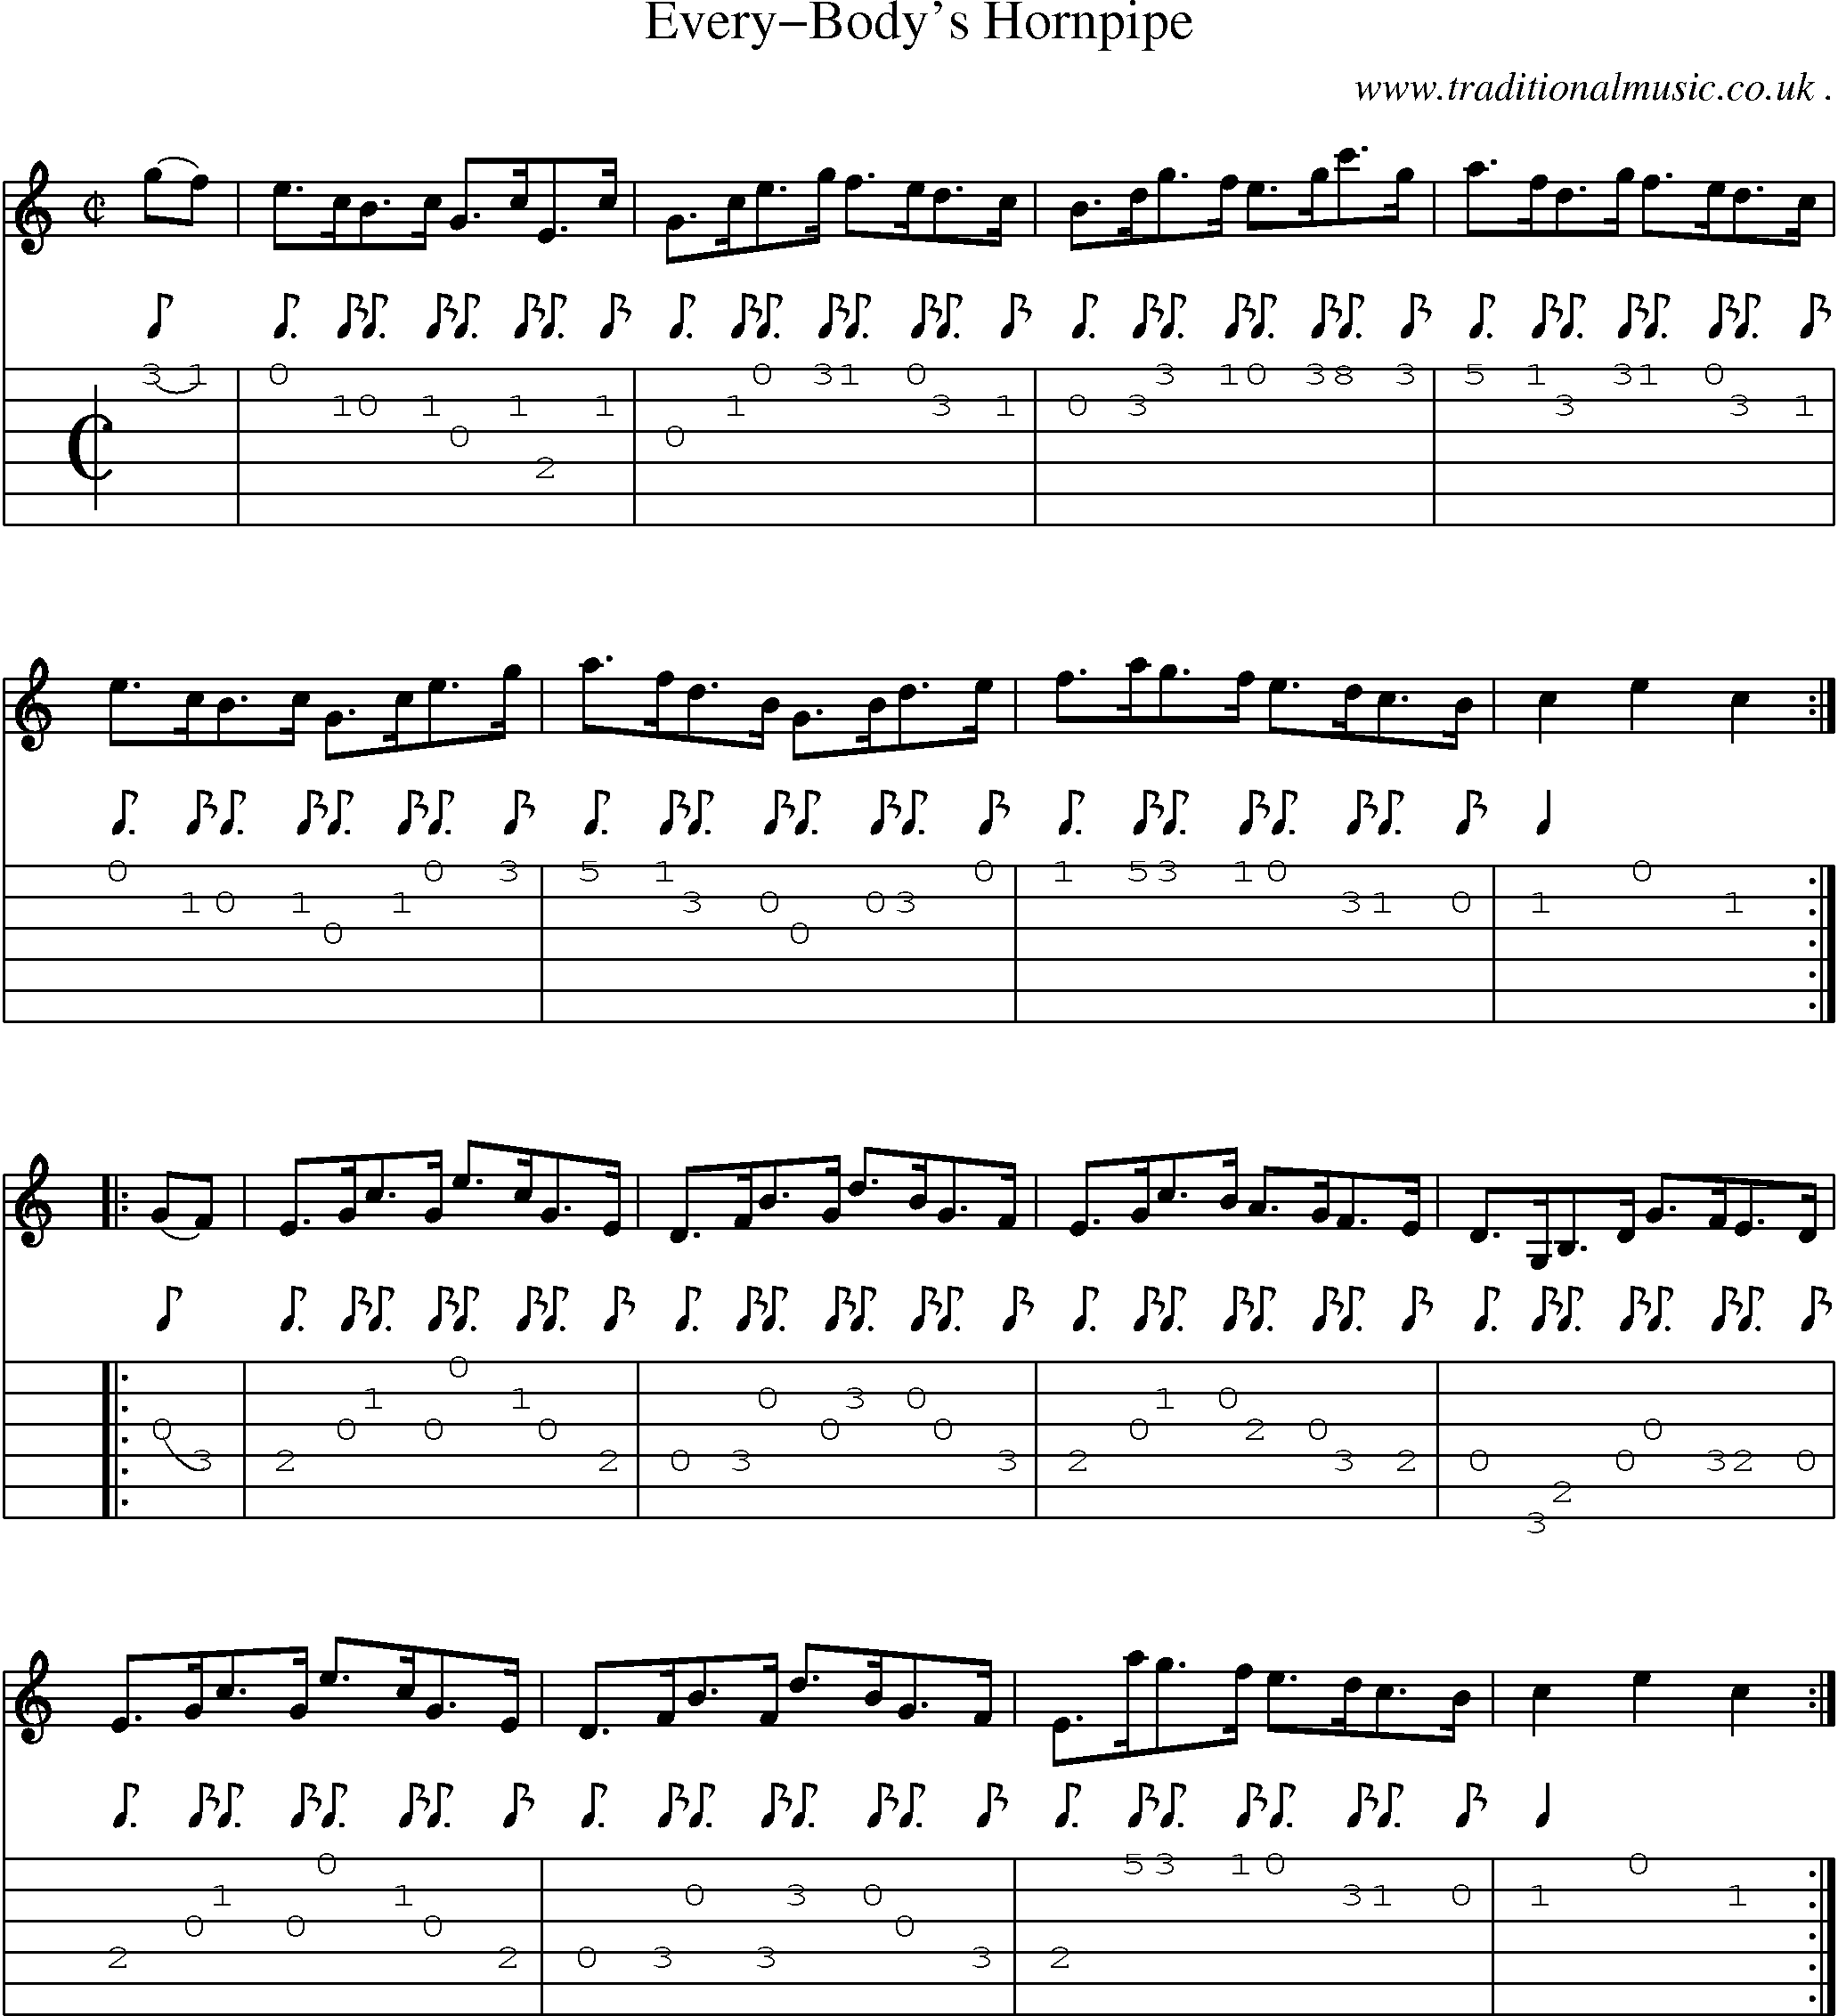 Sheet-Music and Guitar Tabs for Every-bodys Hornpipe